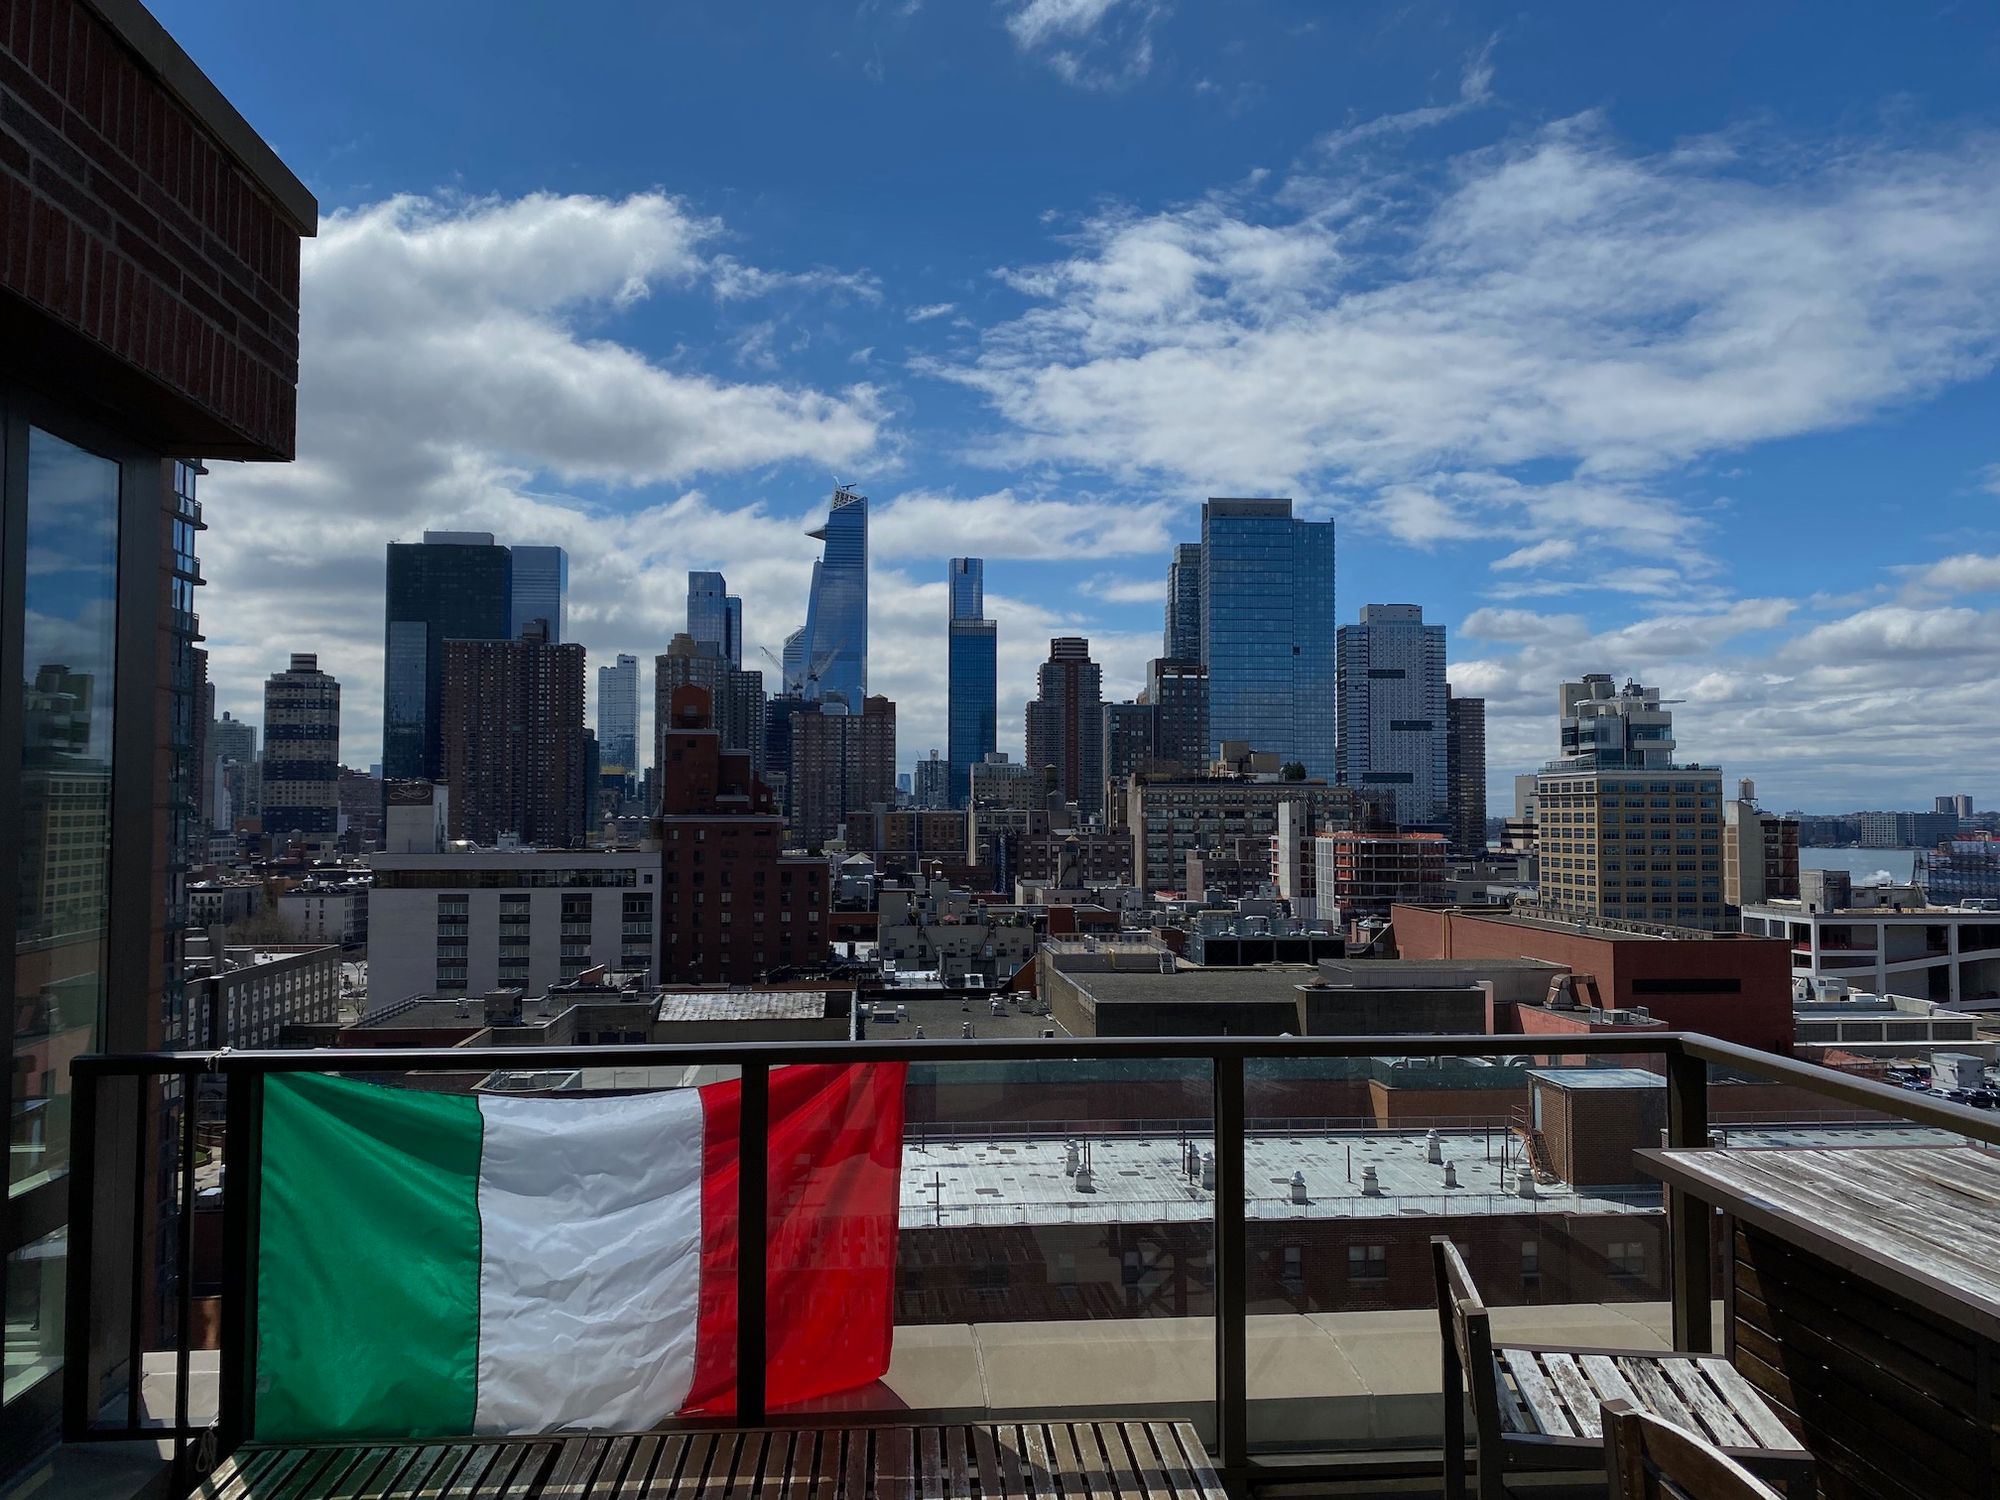 In the background, a skyline with six skyscrapers against a blue sky with a few bright clouds. In the foreground, a terrace with outdoor chairs and an Italian flag hung on the railing.